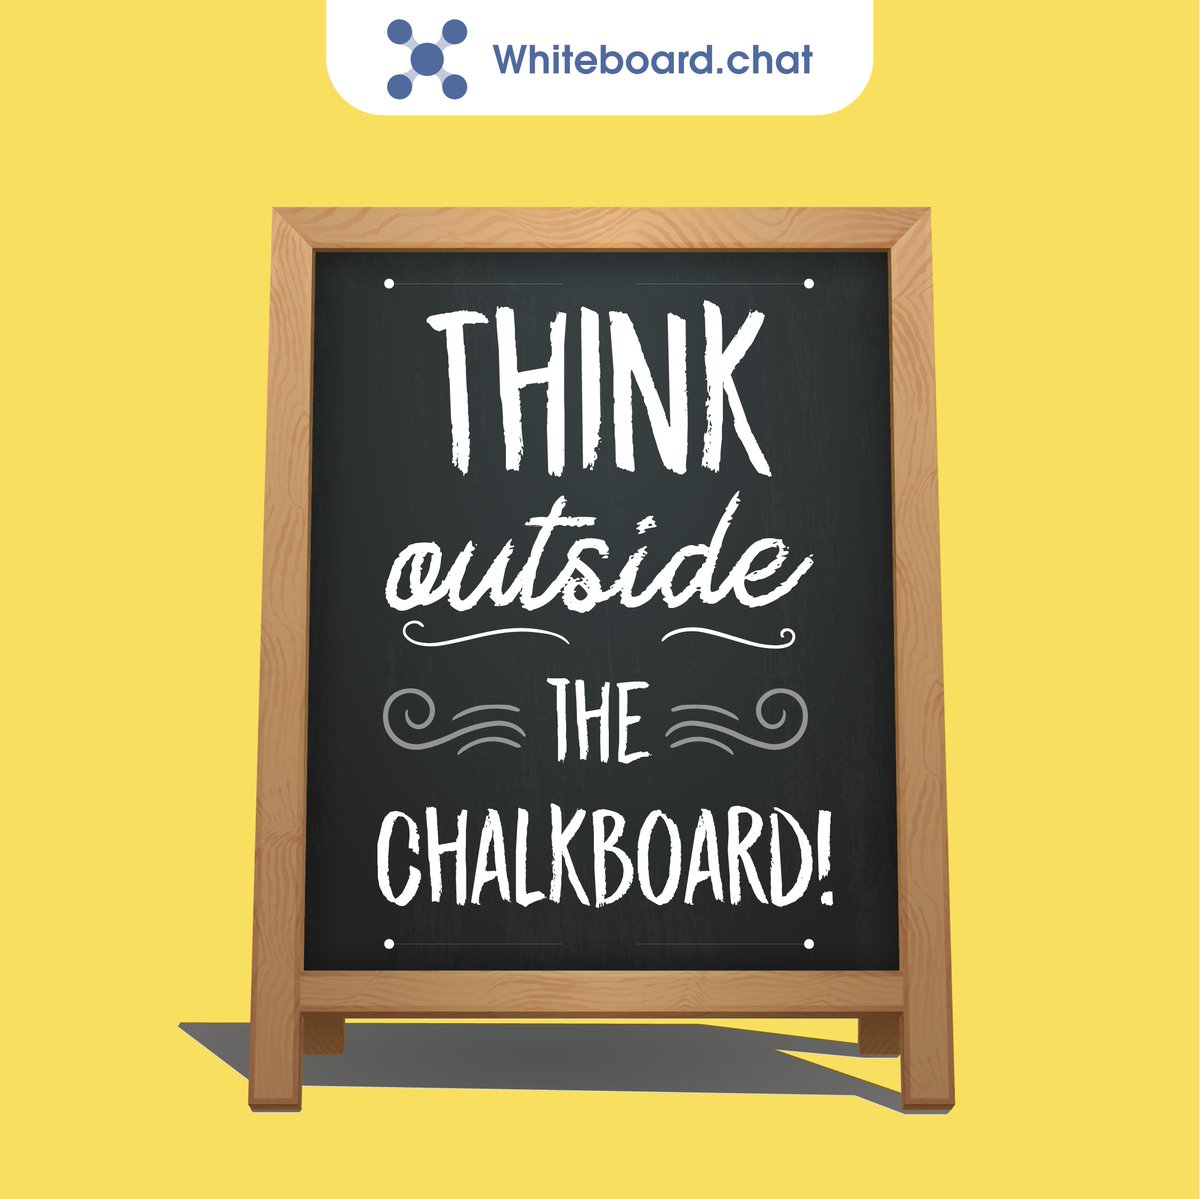 Introducing Whiteboard.chat - An easy-to-use virtual whiteboard designed for teaching. Draw objects, solve simple to complex math problems & add virtual gadgets to improve the teaching experience. Try it for Free! Visit Whiteboard.chat #TeachAnythingAnywhere